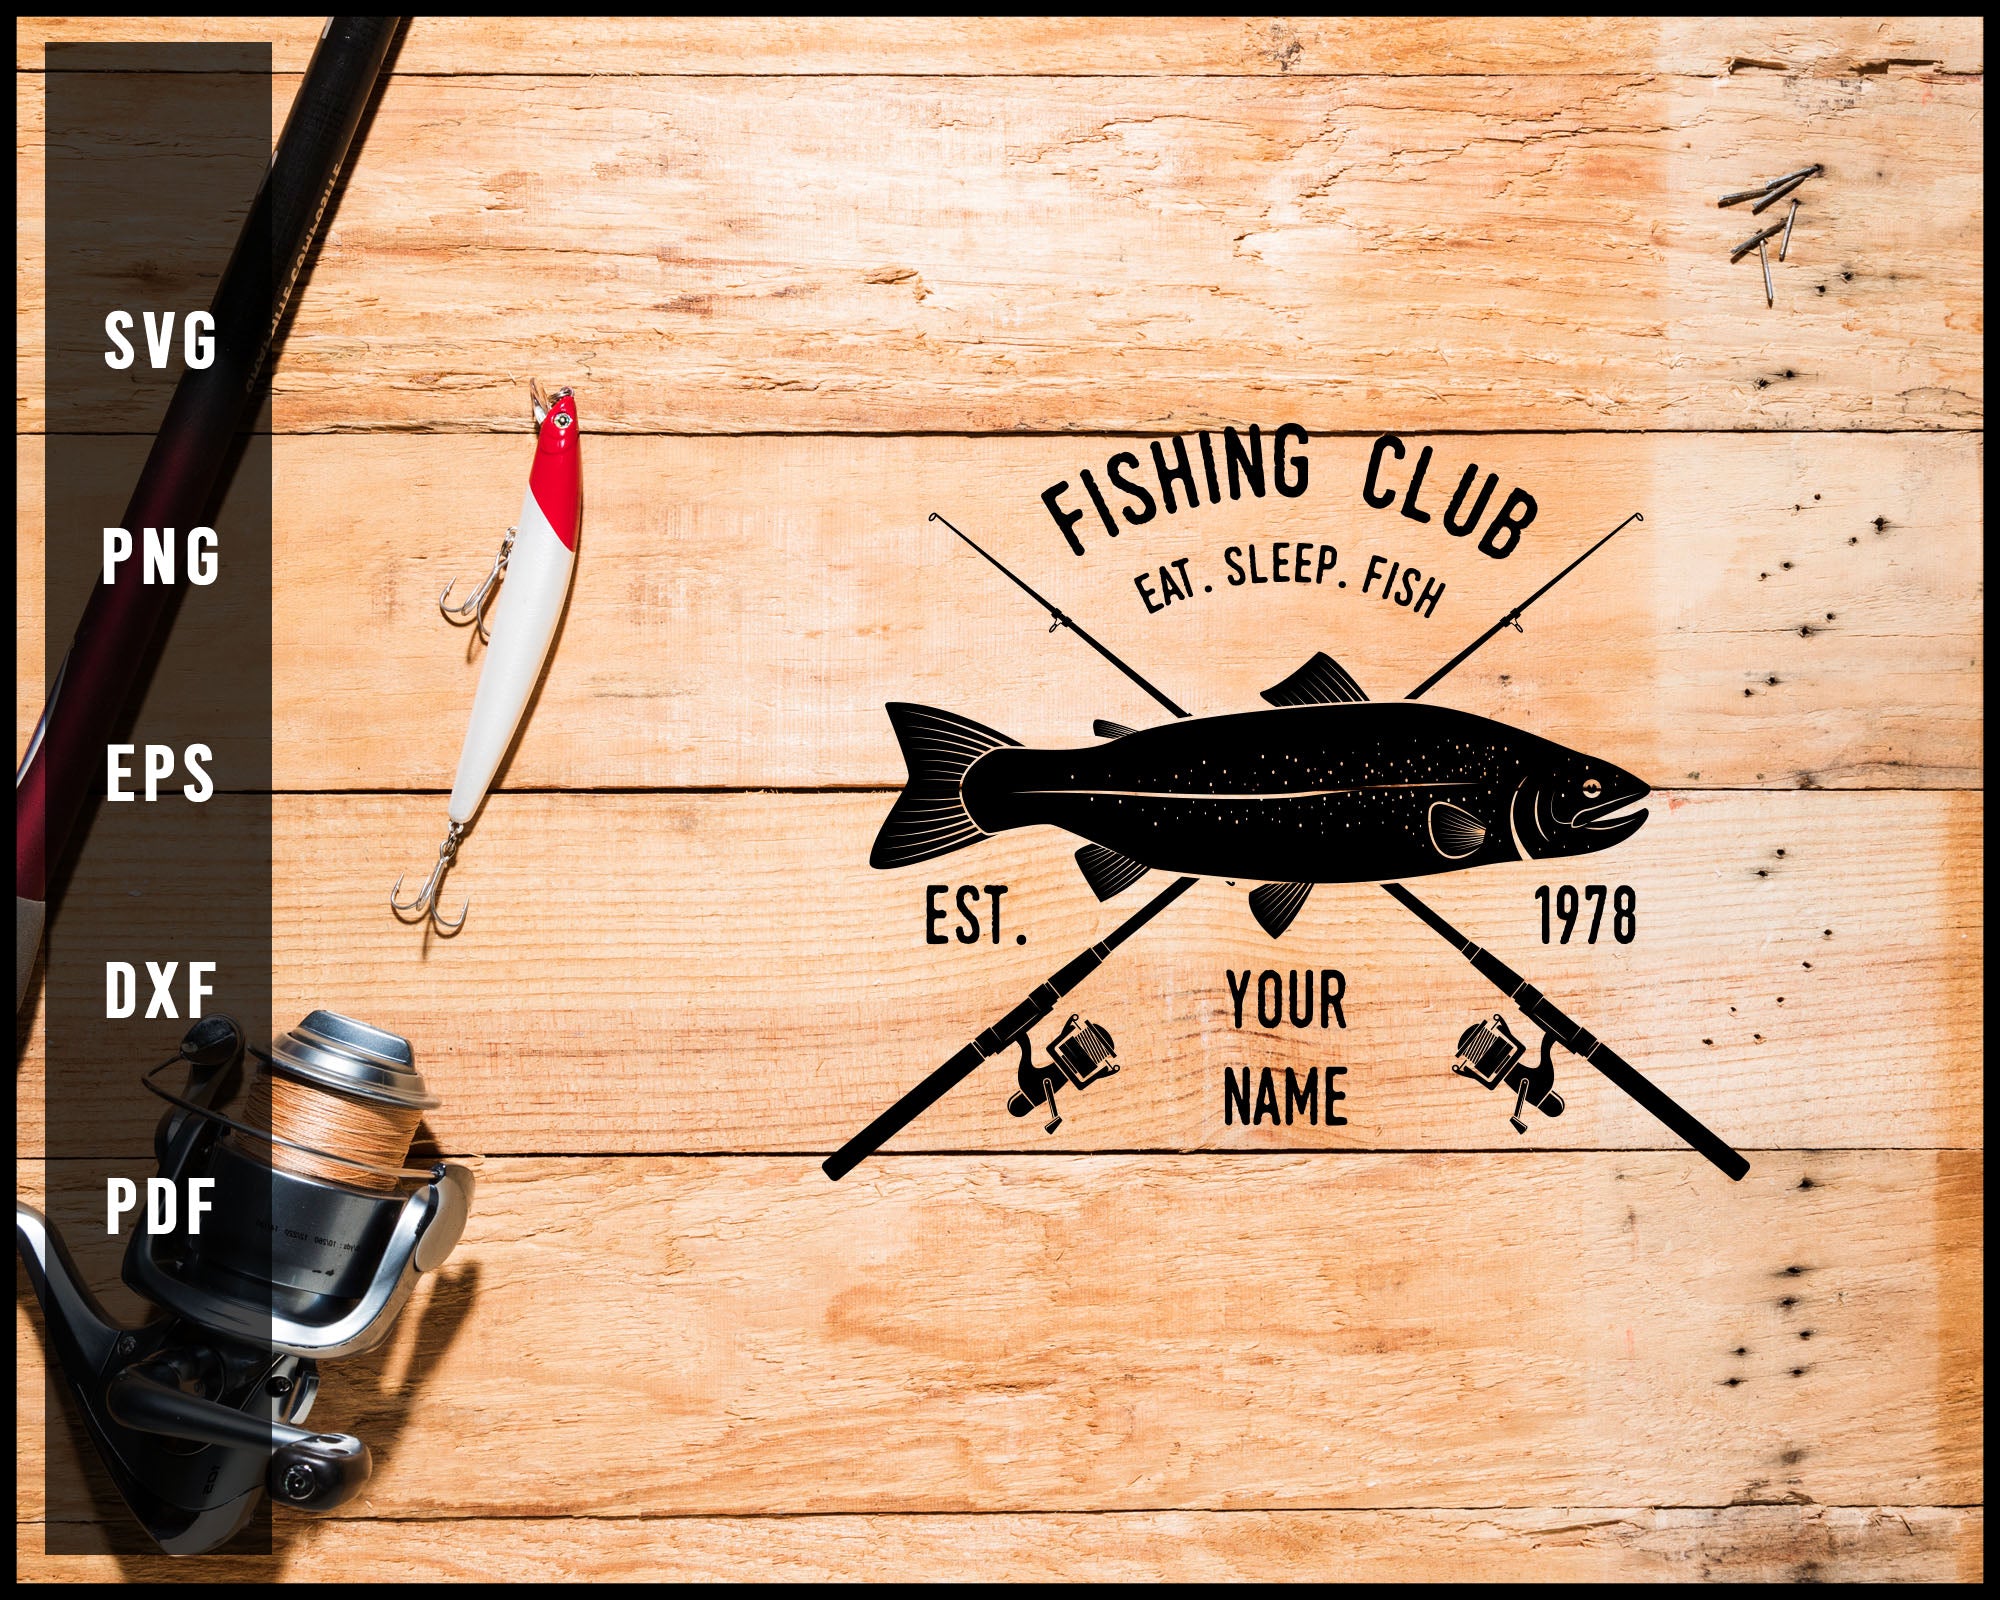 Fishing Club Eat Sleep Fish Est 1978 Your Name svg png Silhouette Designs For Cricut And Printable Files